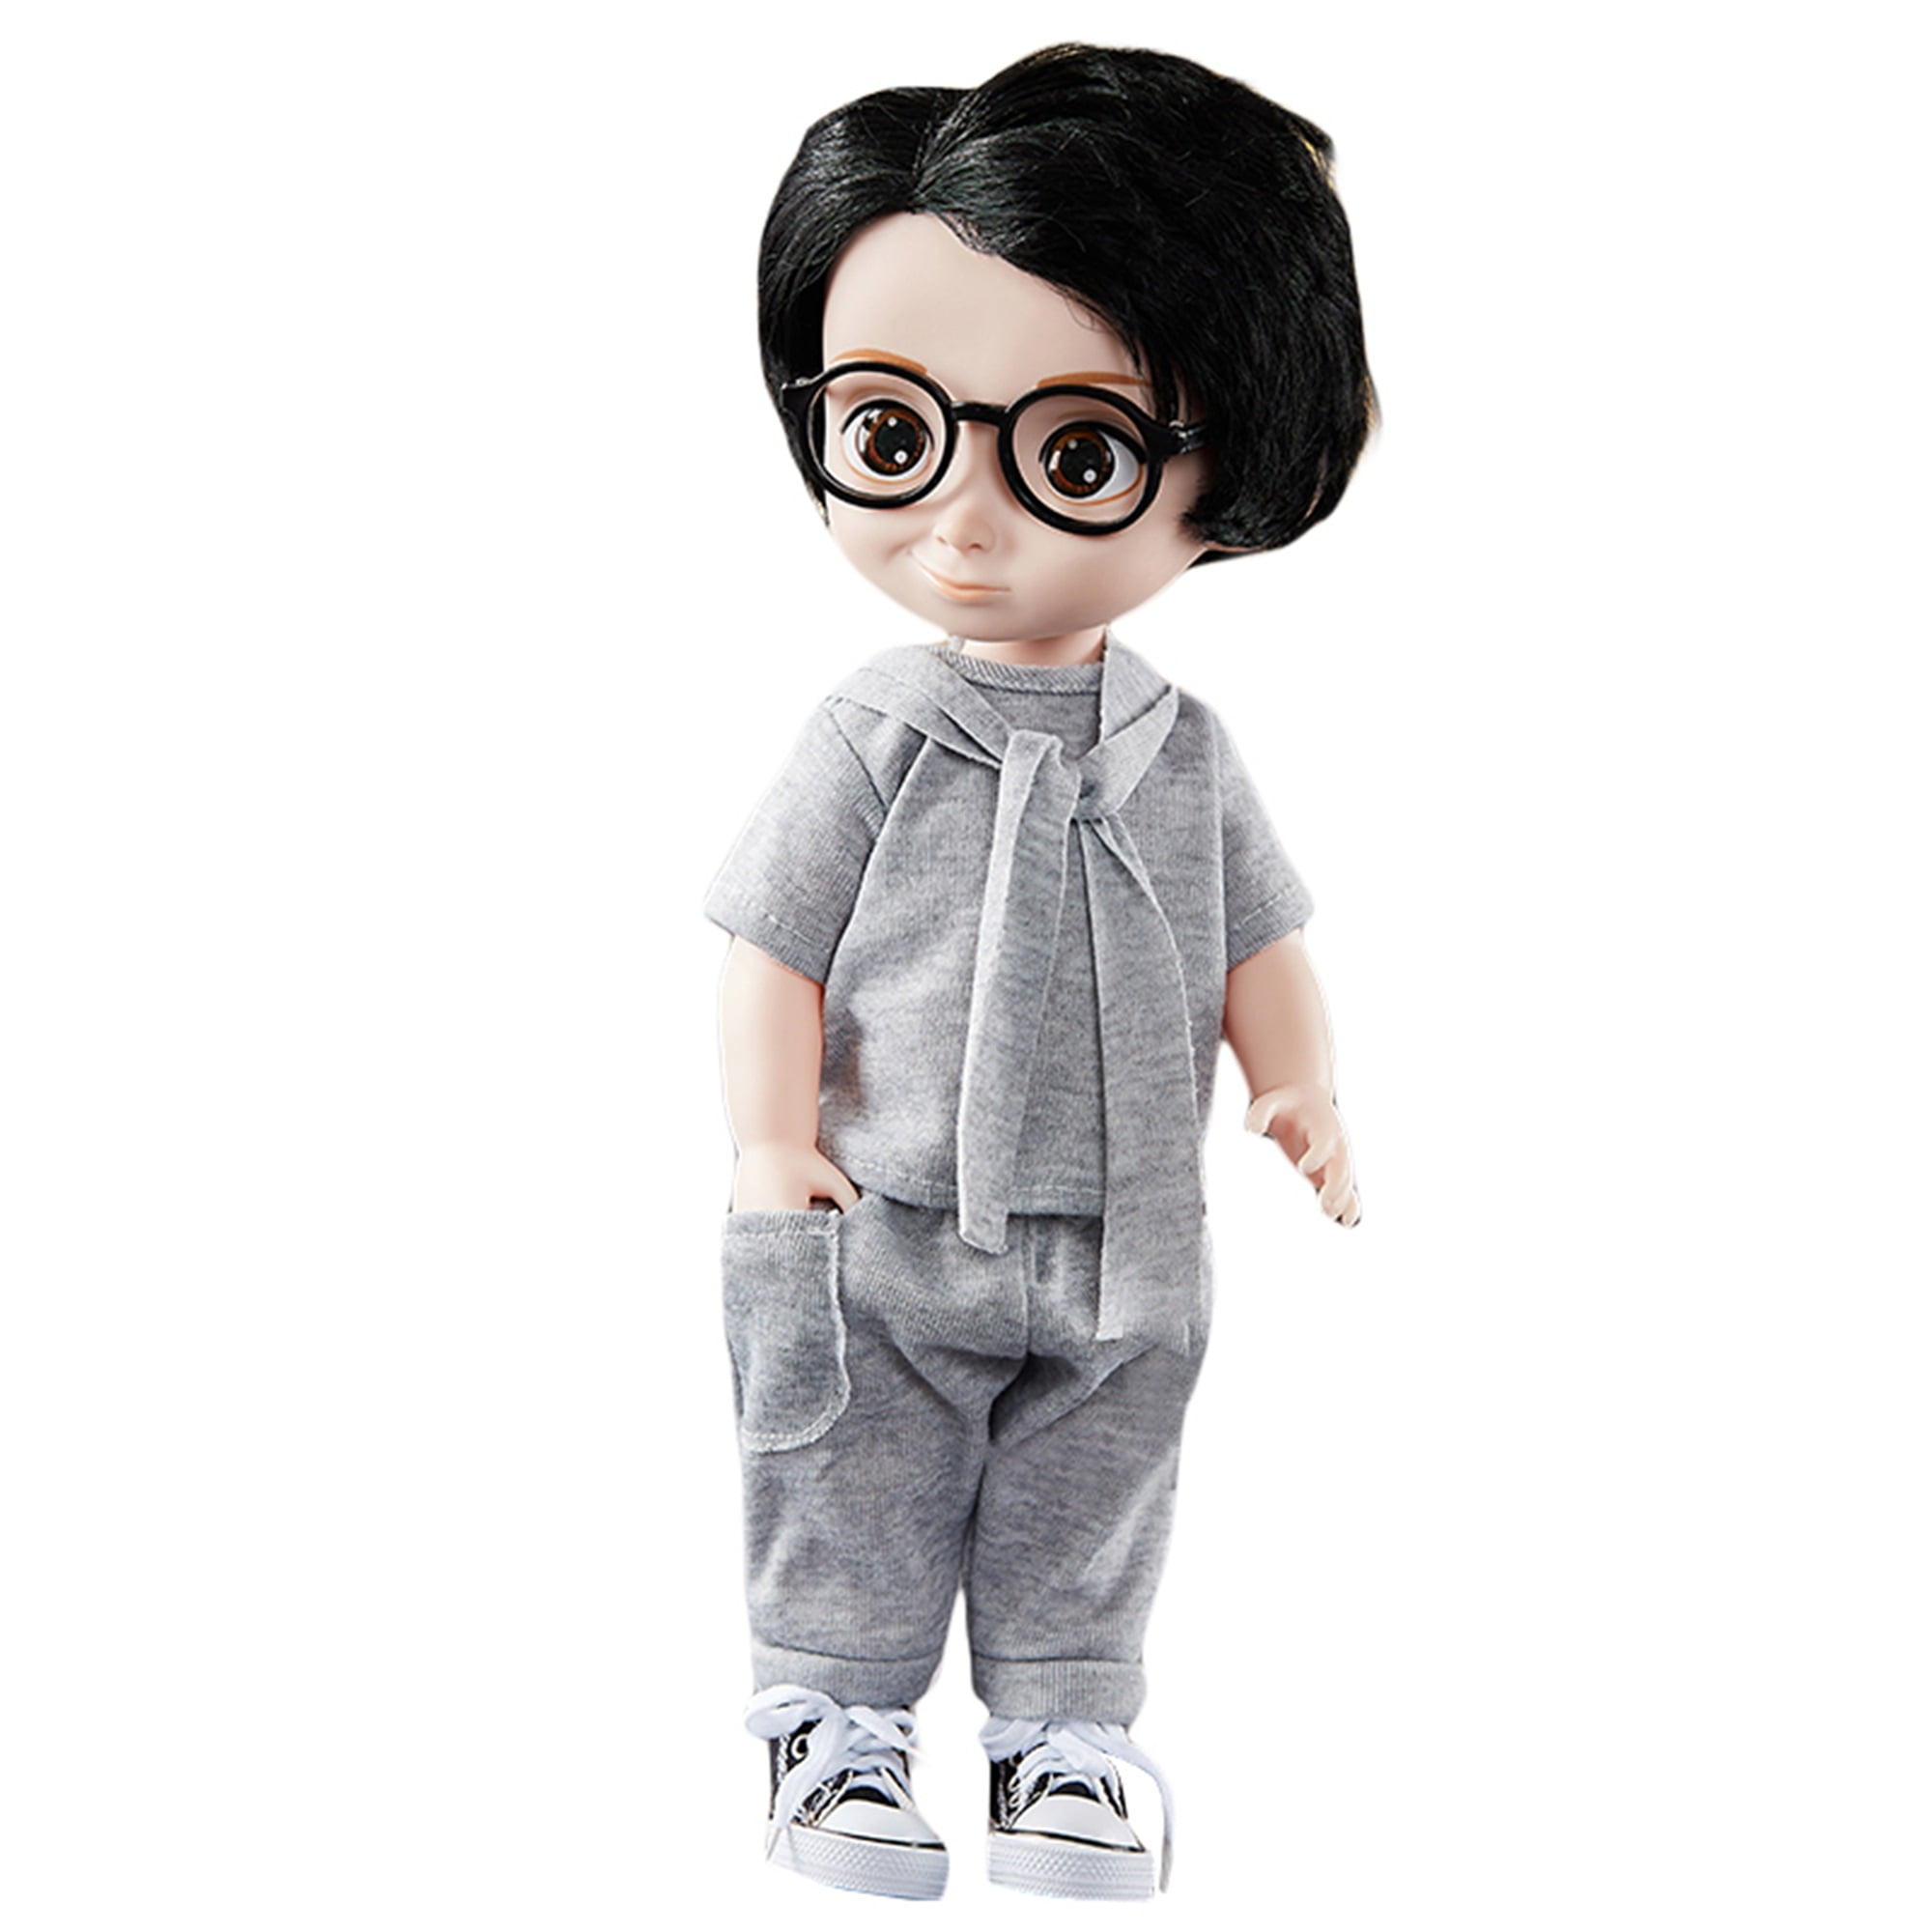 Buy Handsome Boy BJD Doll Cute Flexible Cartoon Character Doll Toy with  Shirt Pants Birthday Gifts for Kids Online at Lowest Price in Ubuy Nepal.  697084567